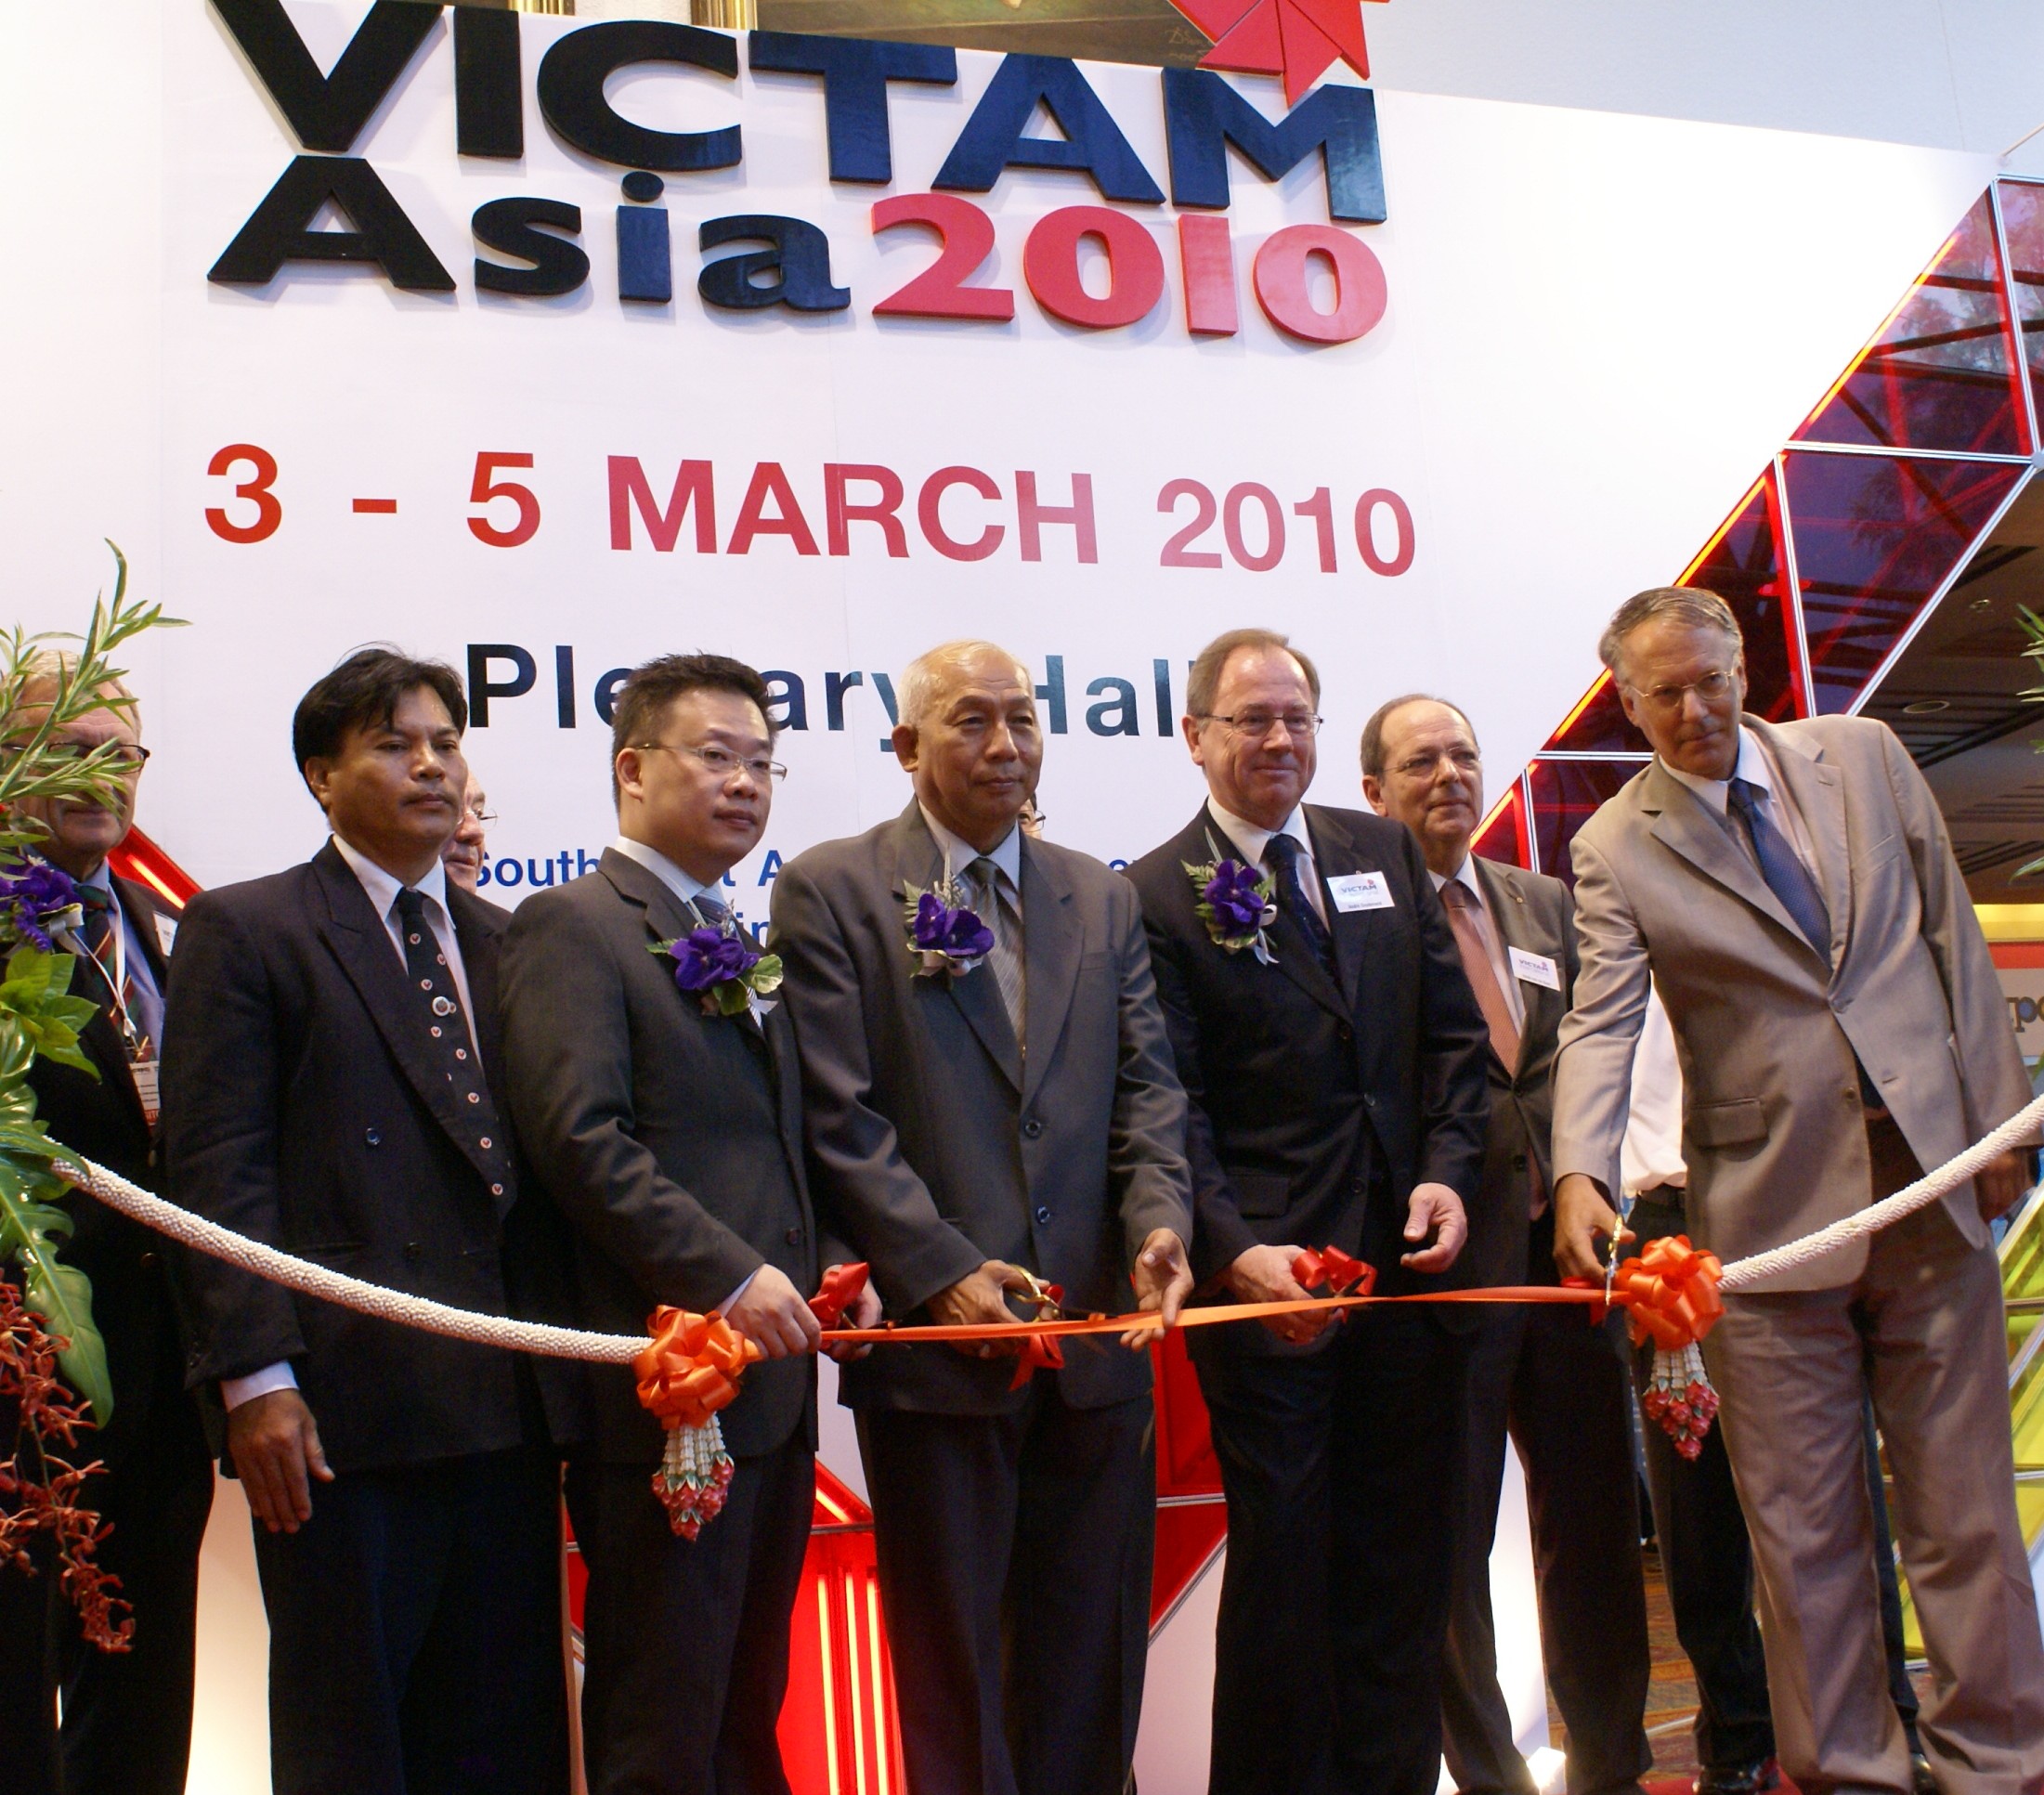 Victam Asia 2010 officially opened – Photos